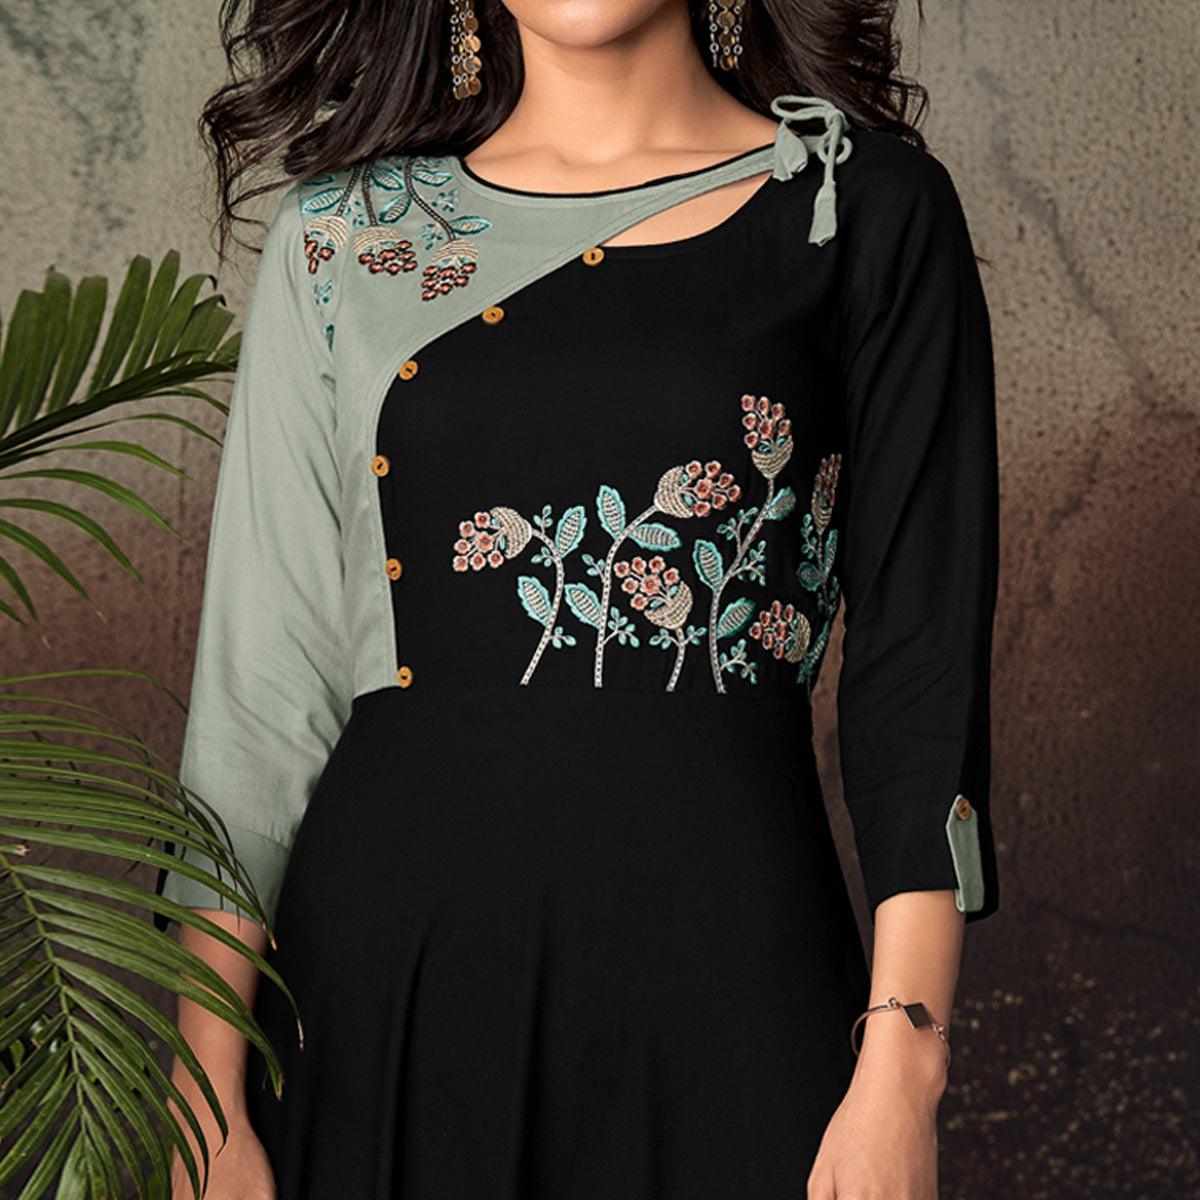 Elegant Embroidered Kurtis For All Occasions